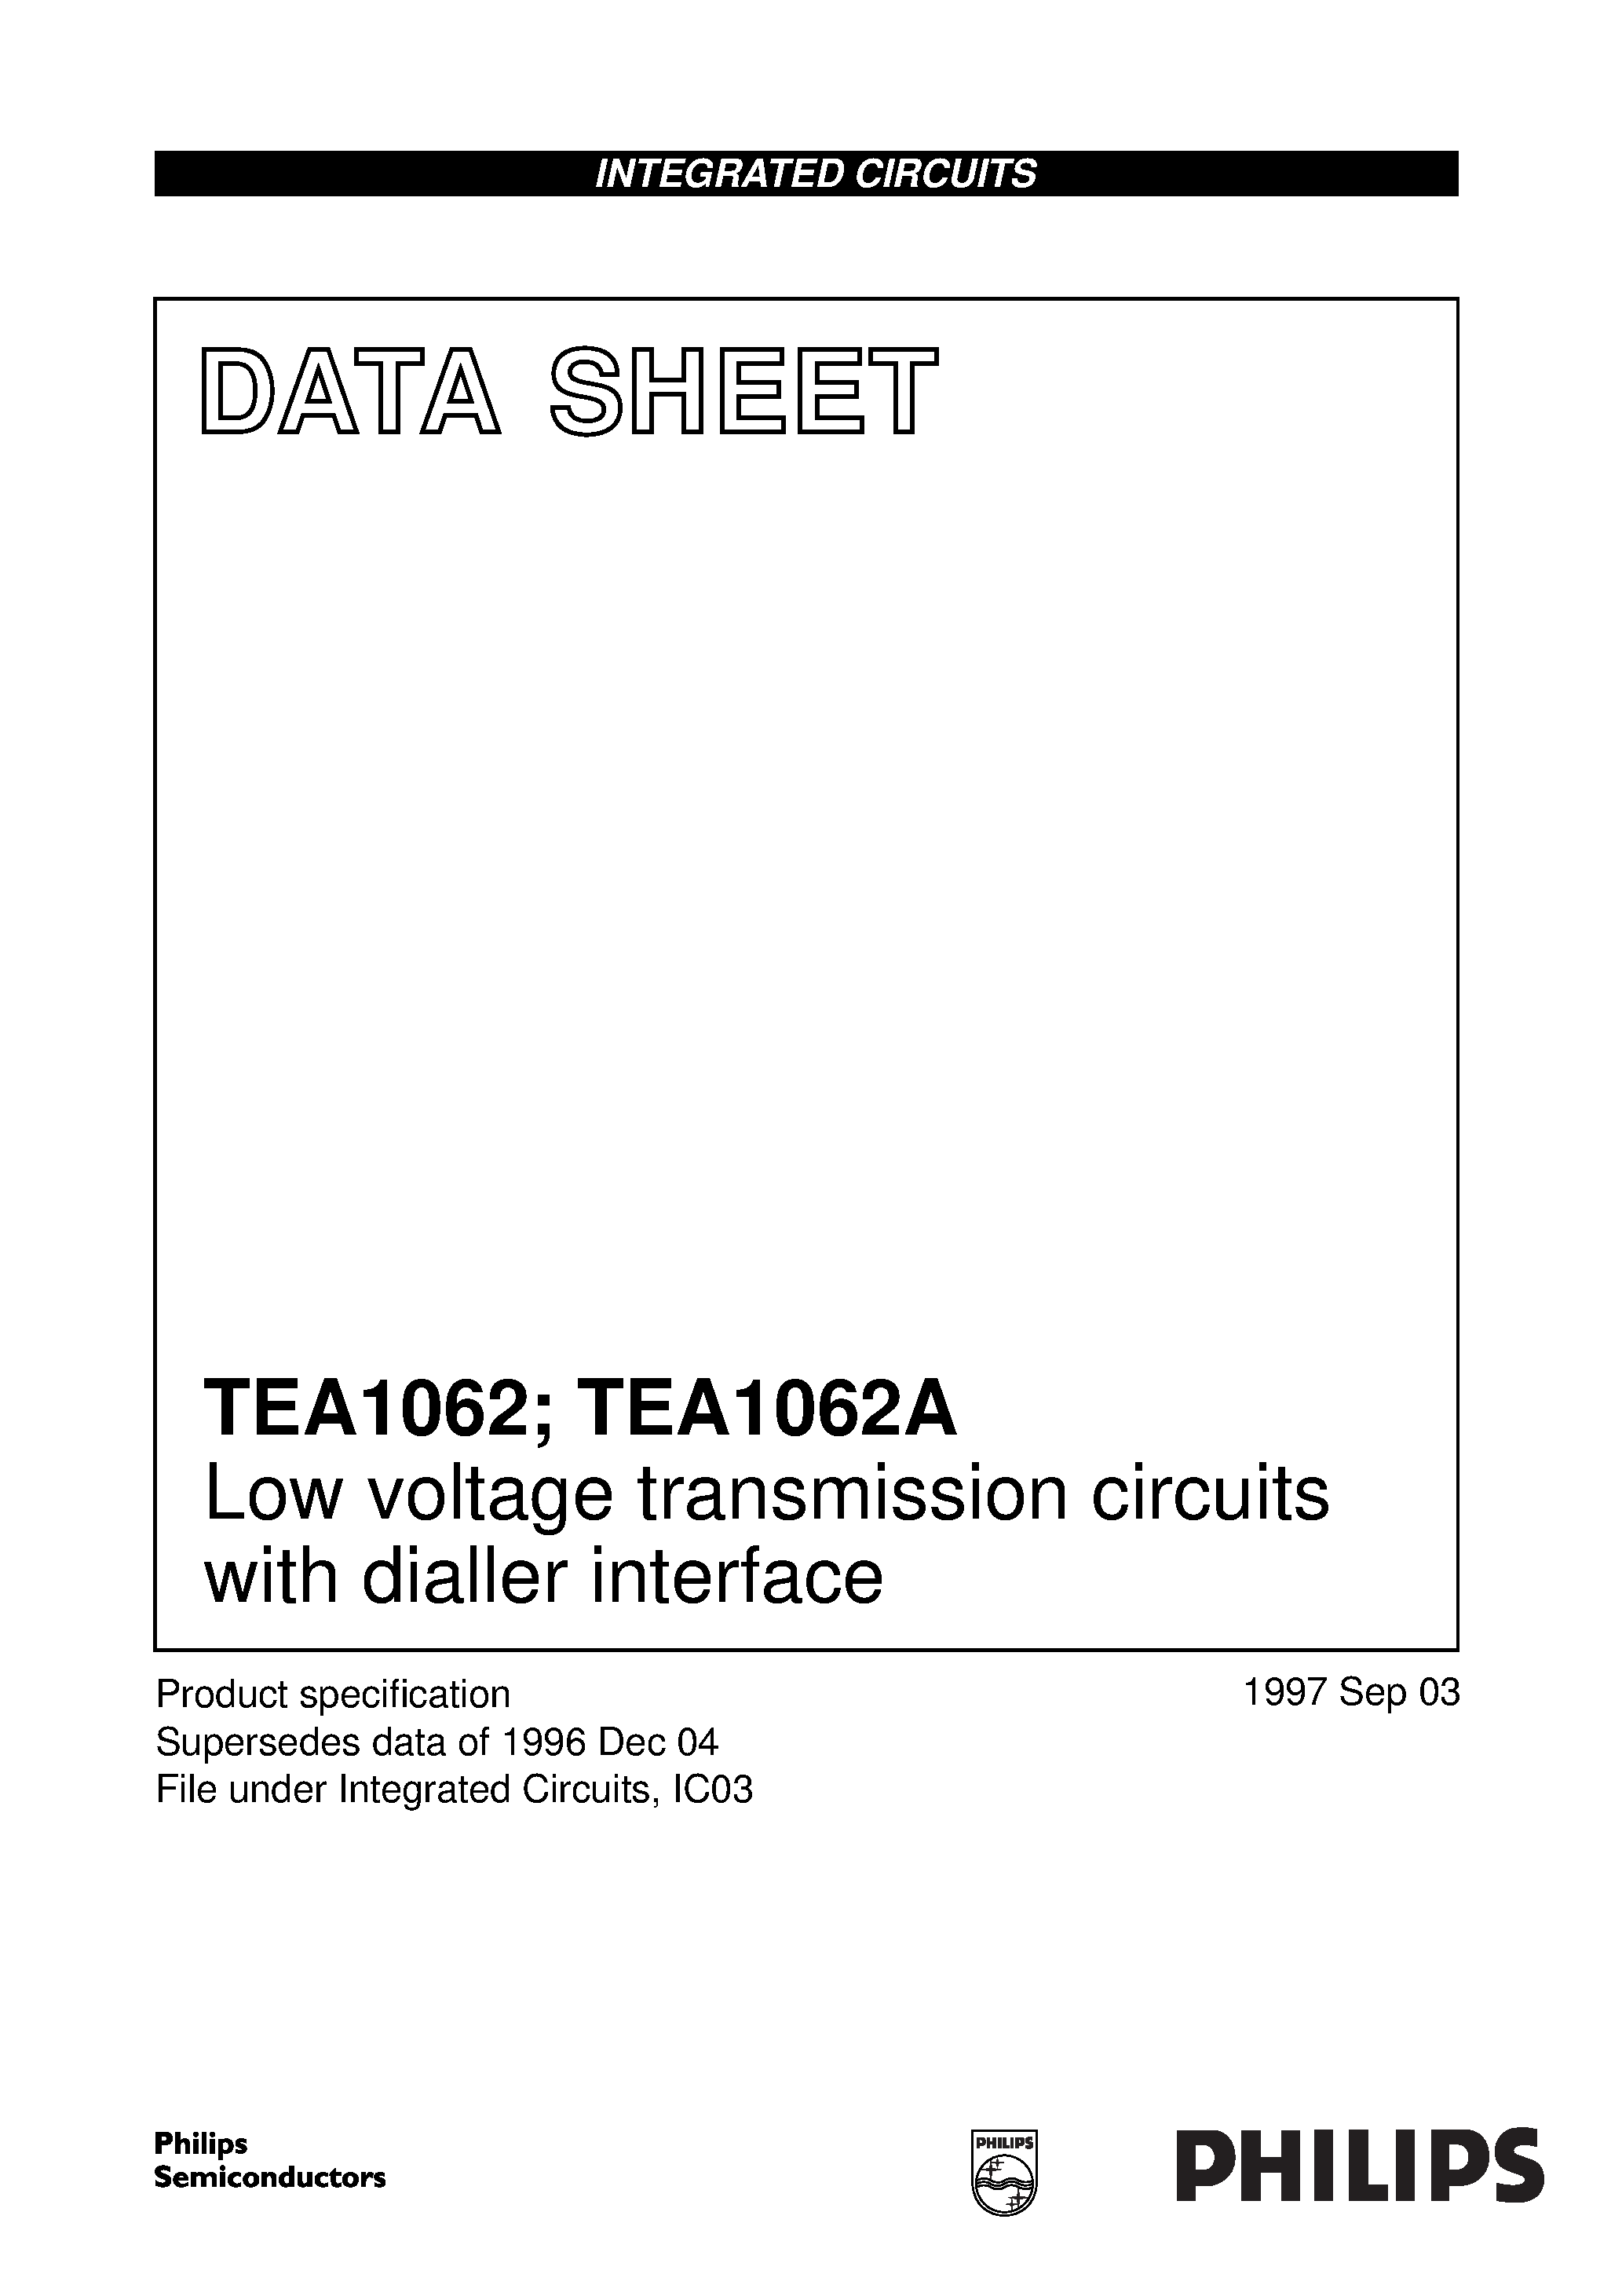 Datasheet TEA1062AM1 - Low voltage transmission circuits with dialler interface page 1